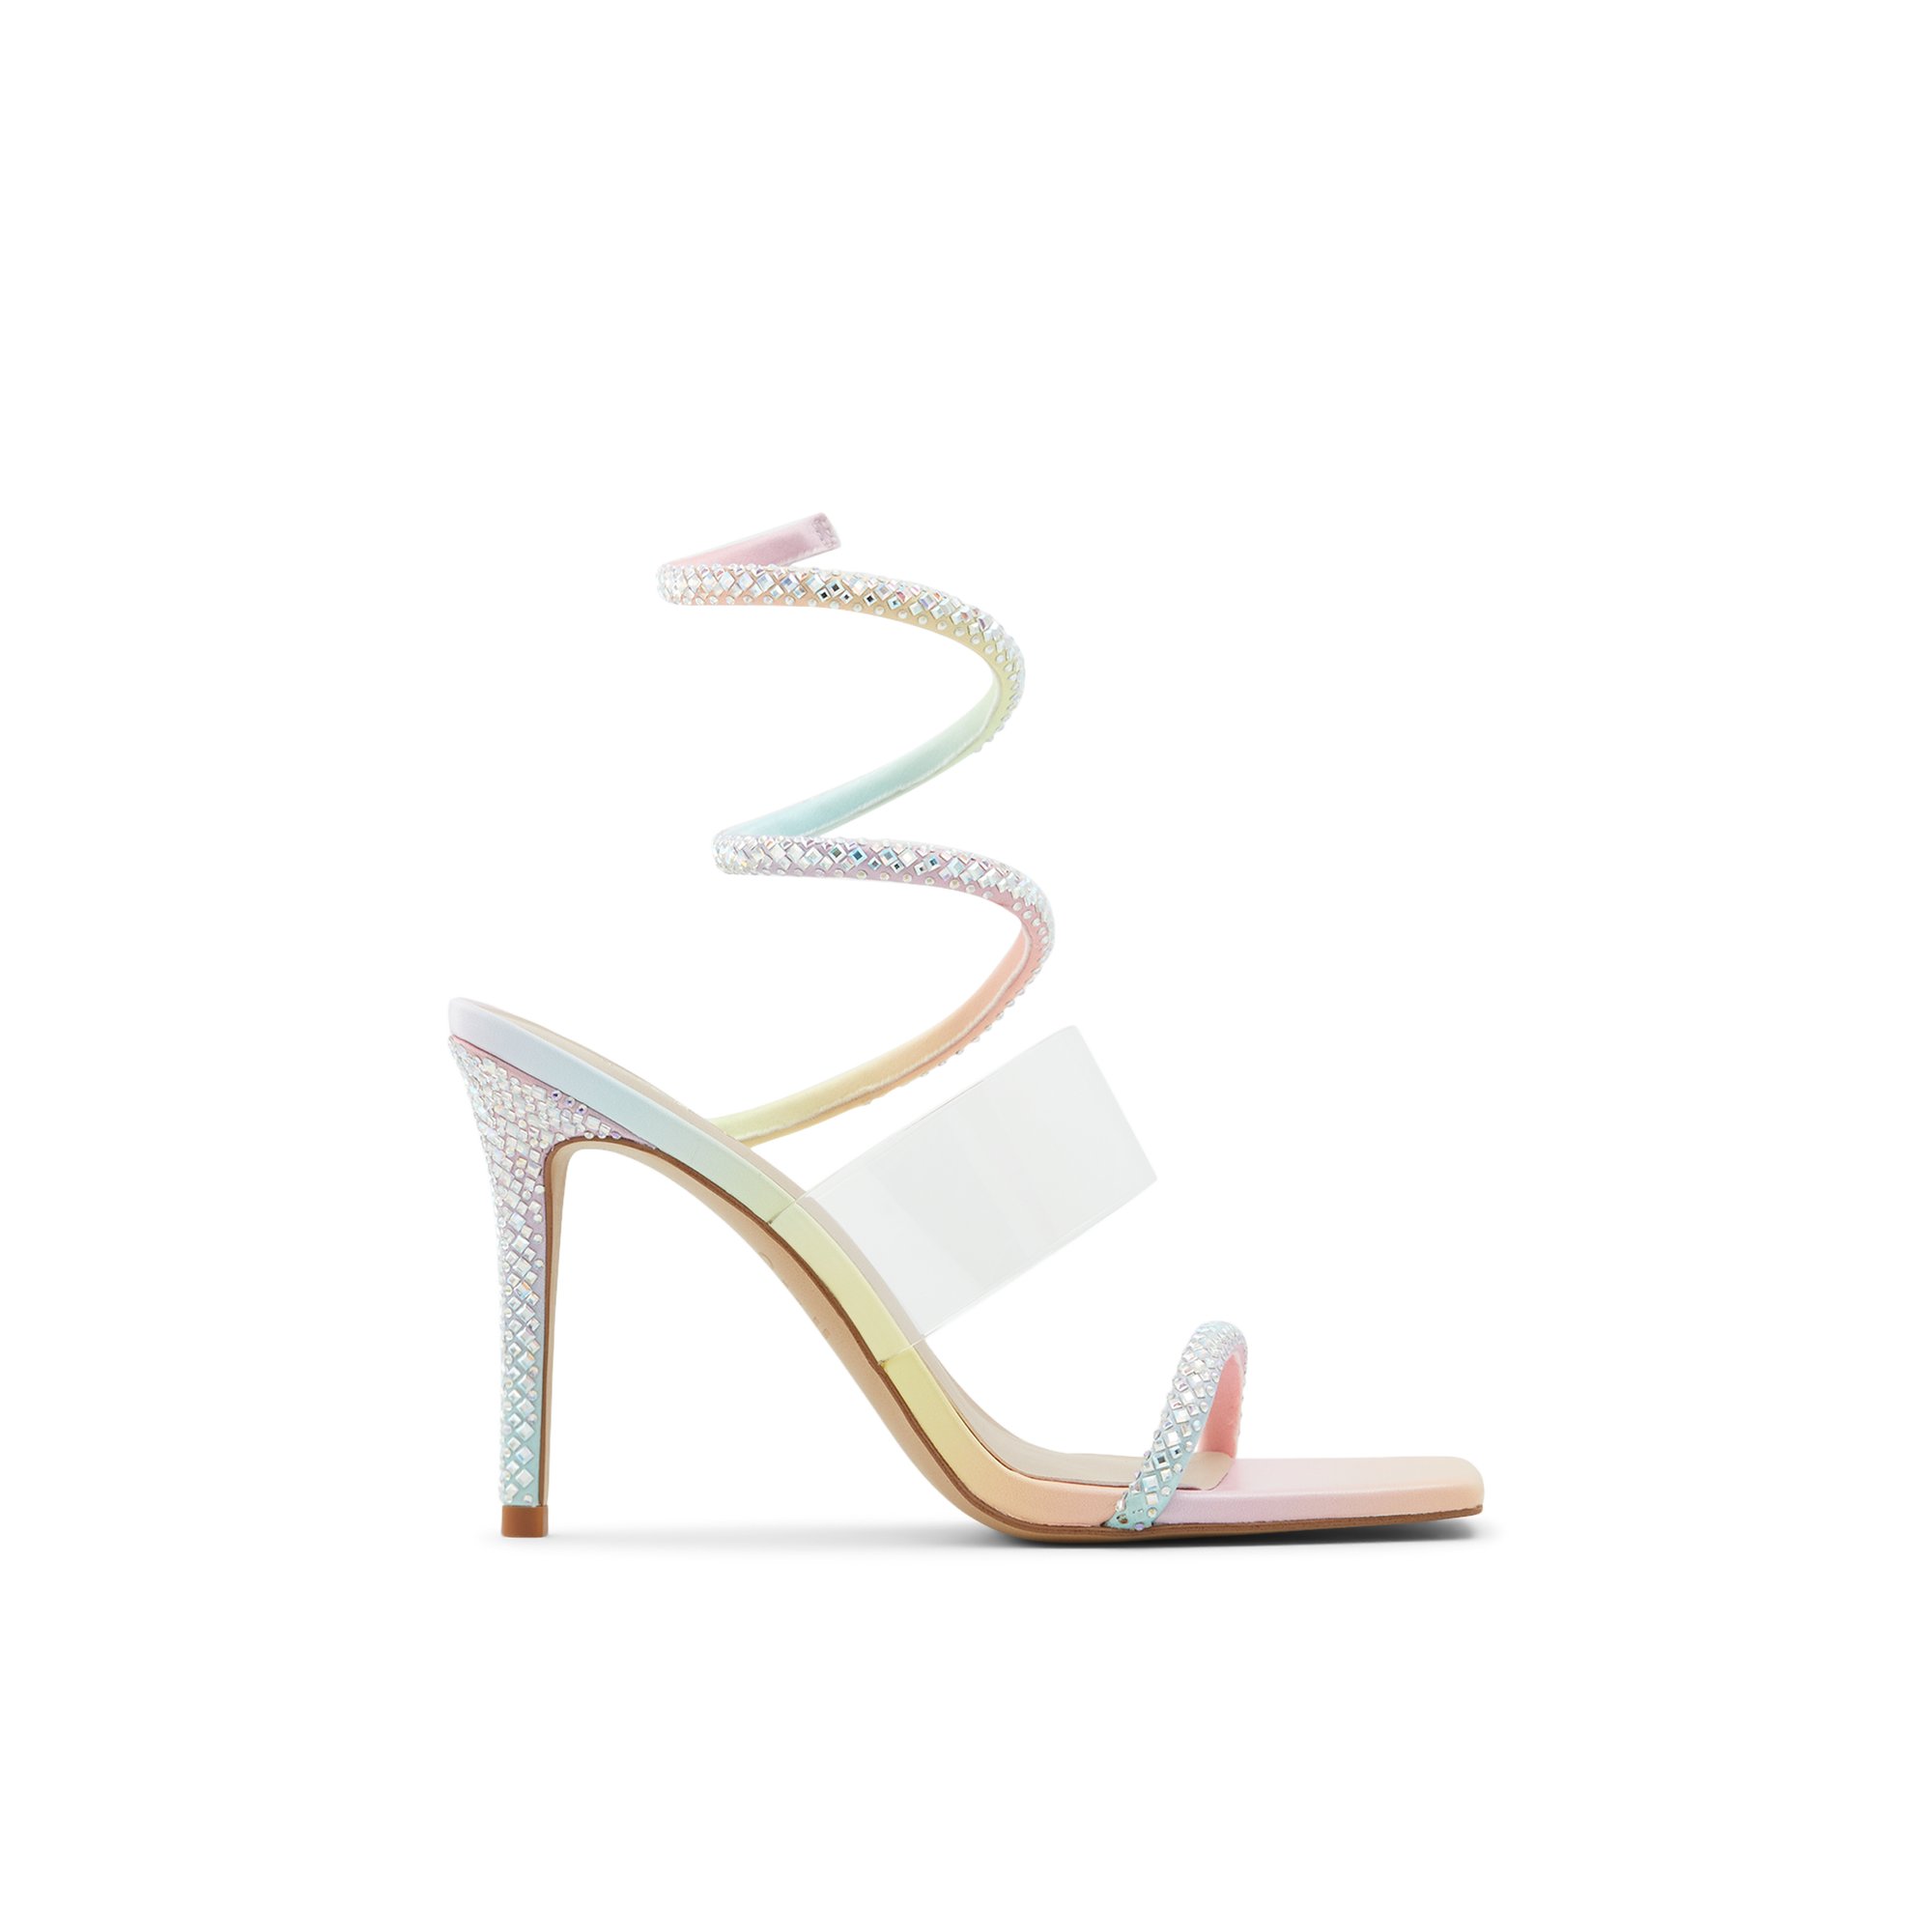 Image of ALDO Selima - Women's Special Occasion Collection - Pastel, Size 6